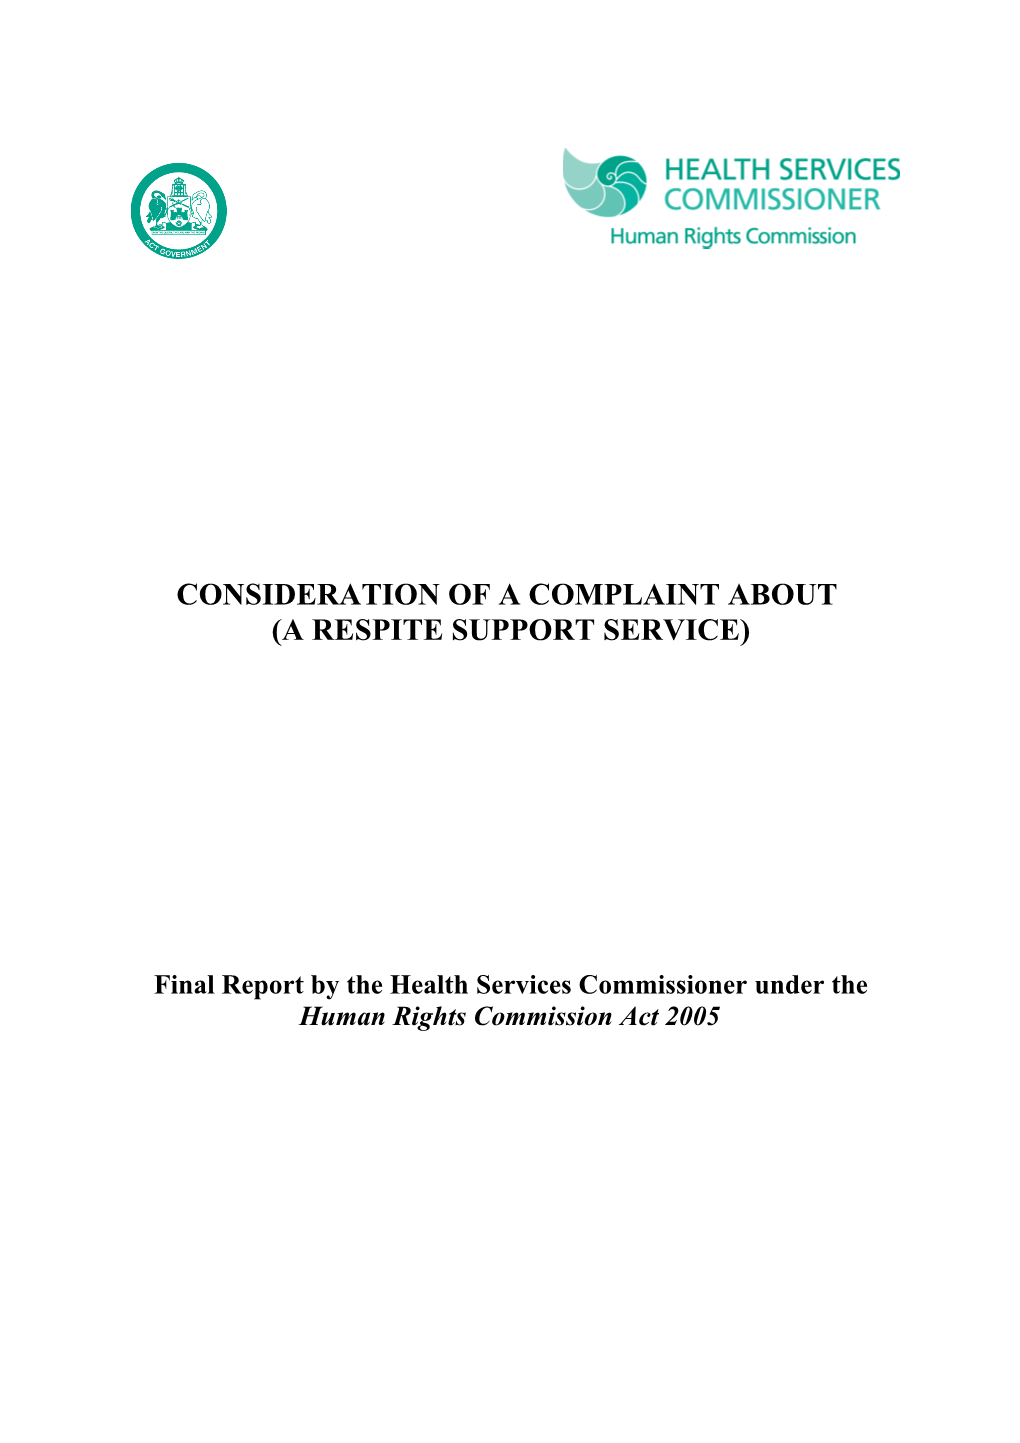 Final Reports by the Human Rights Commission